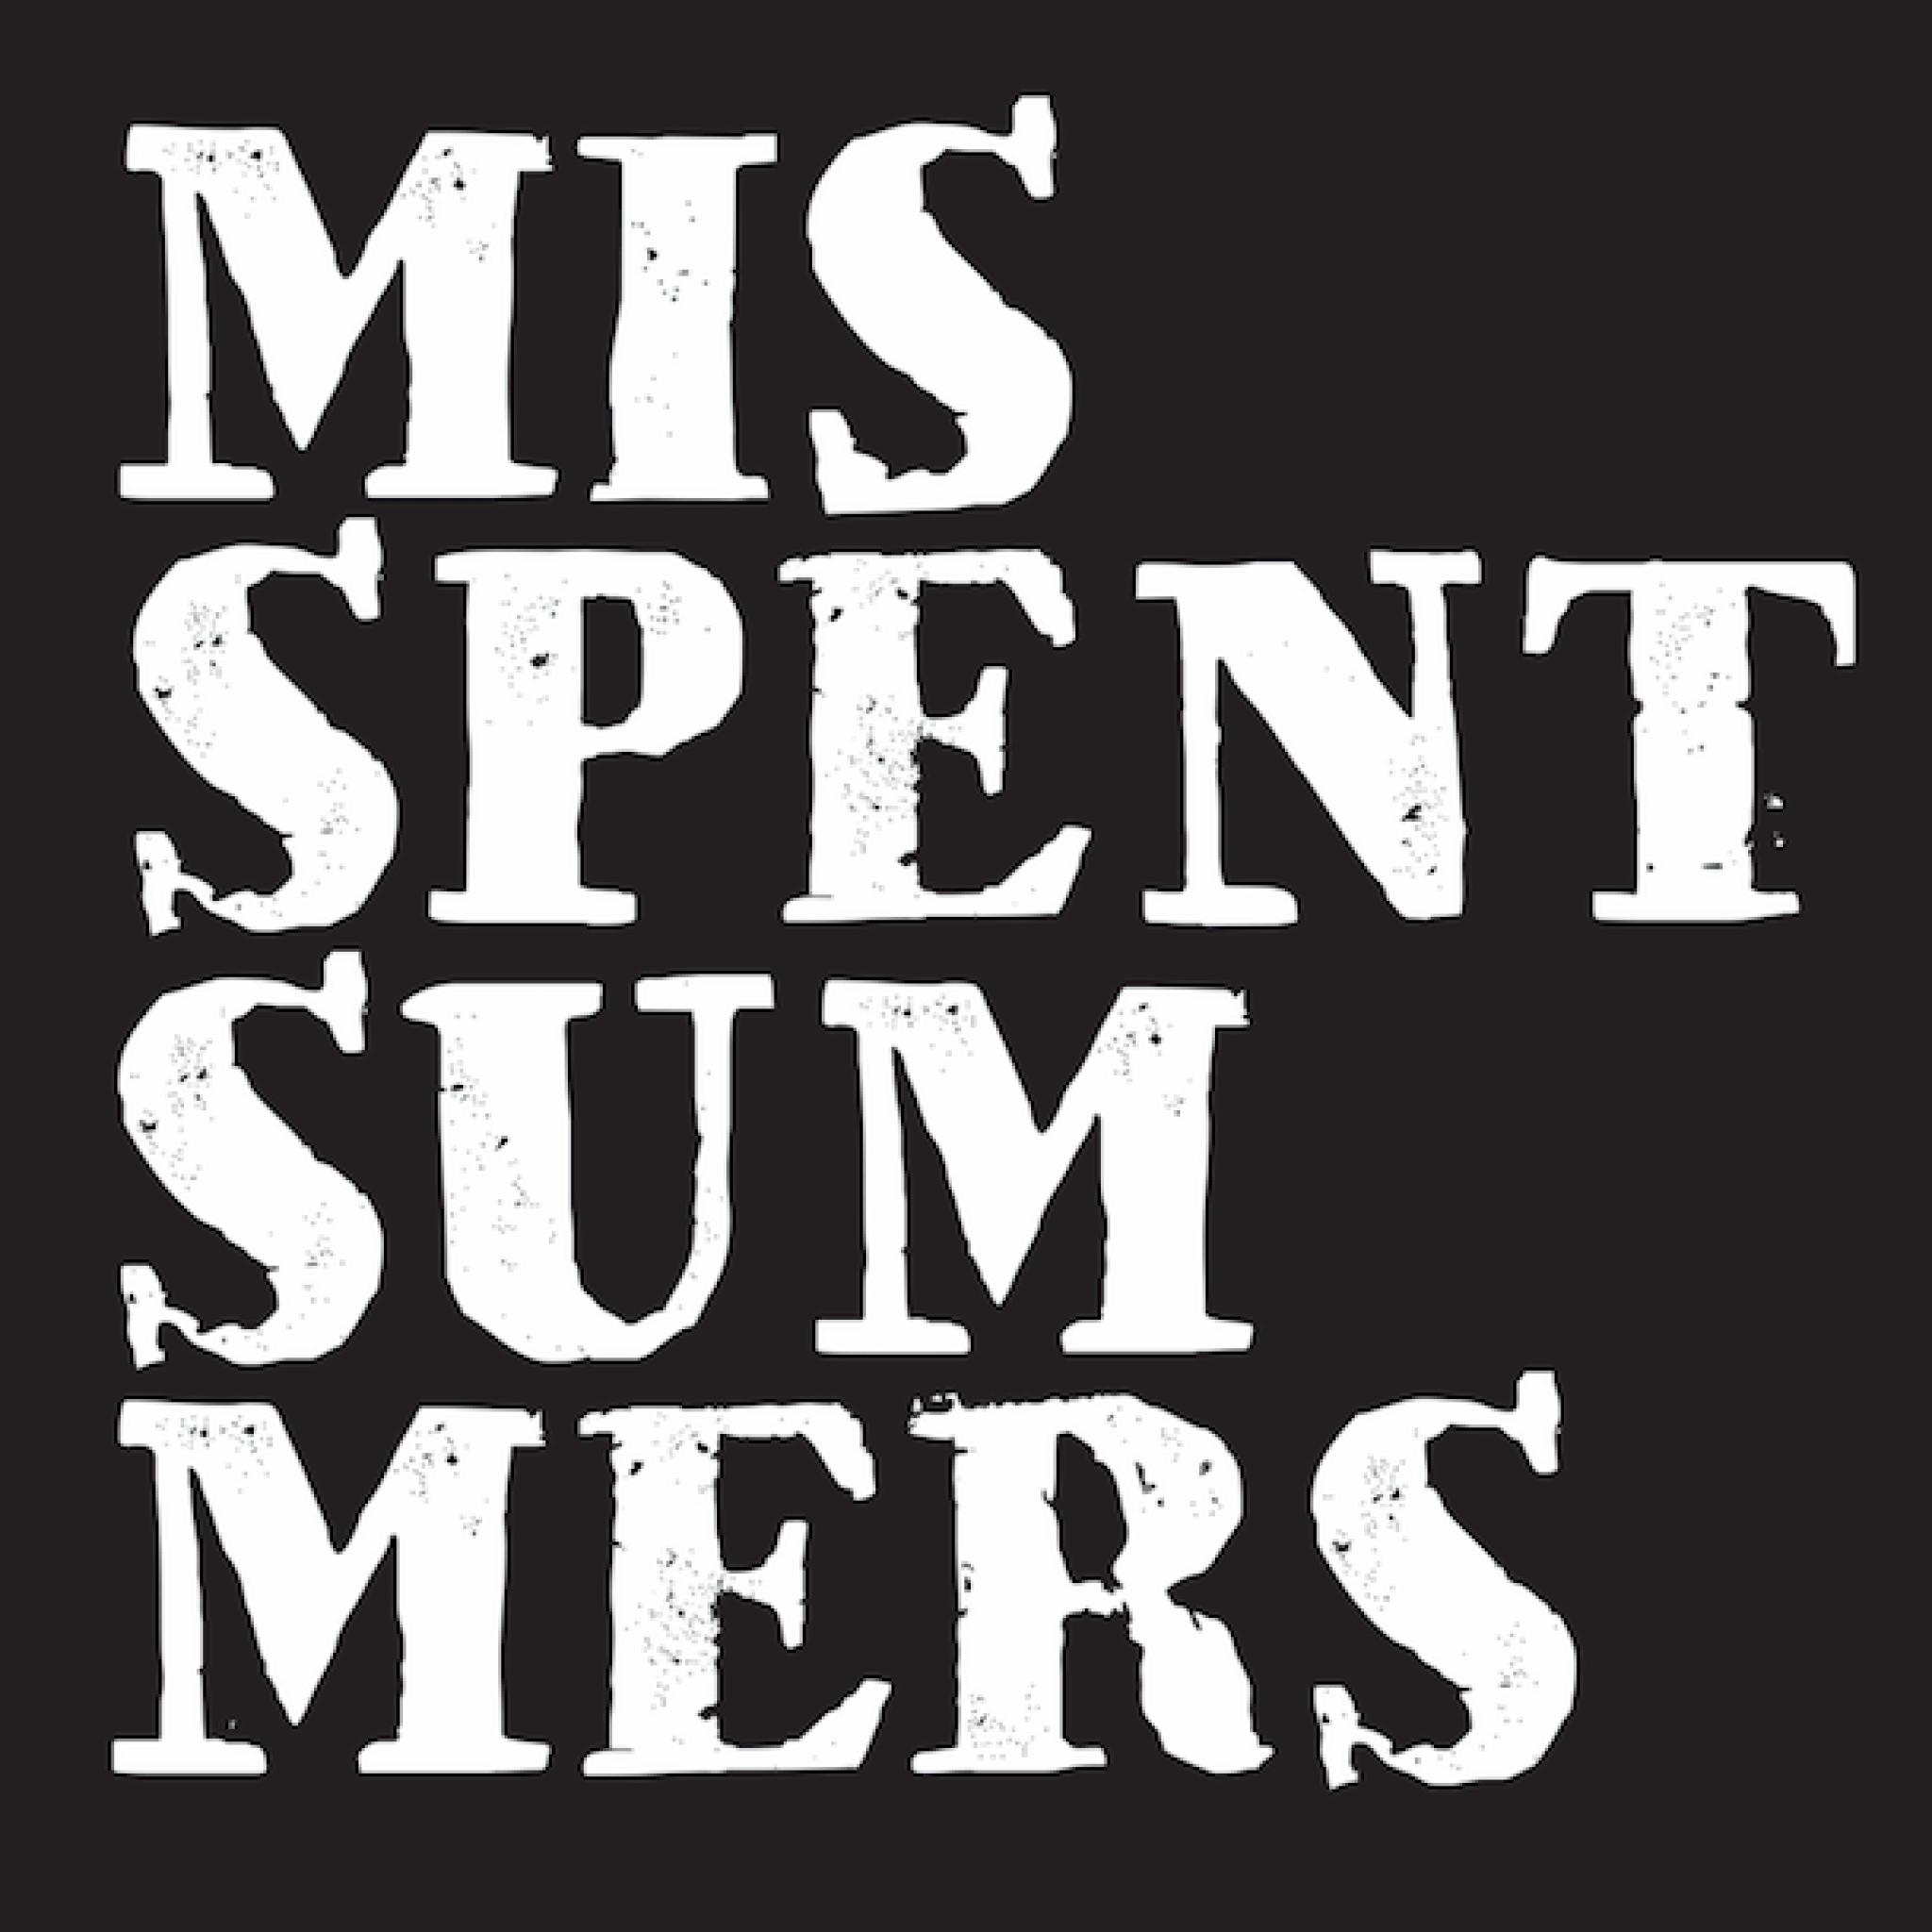 A note about our Collaborators - Misspent Summers